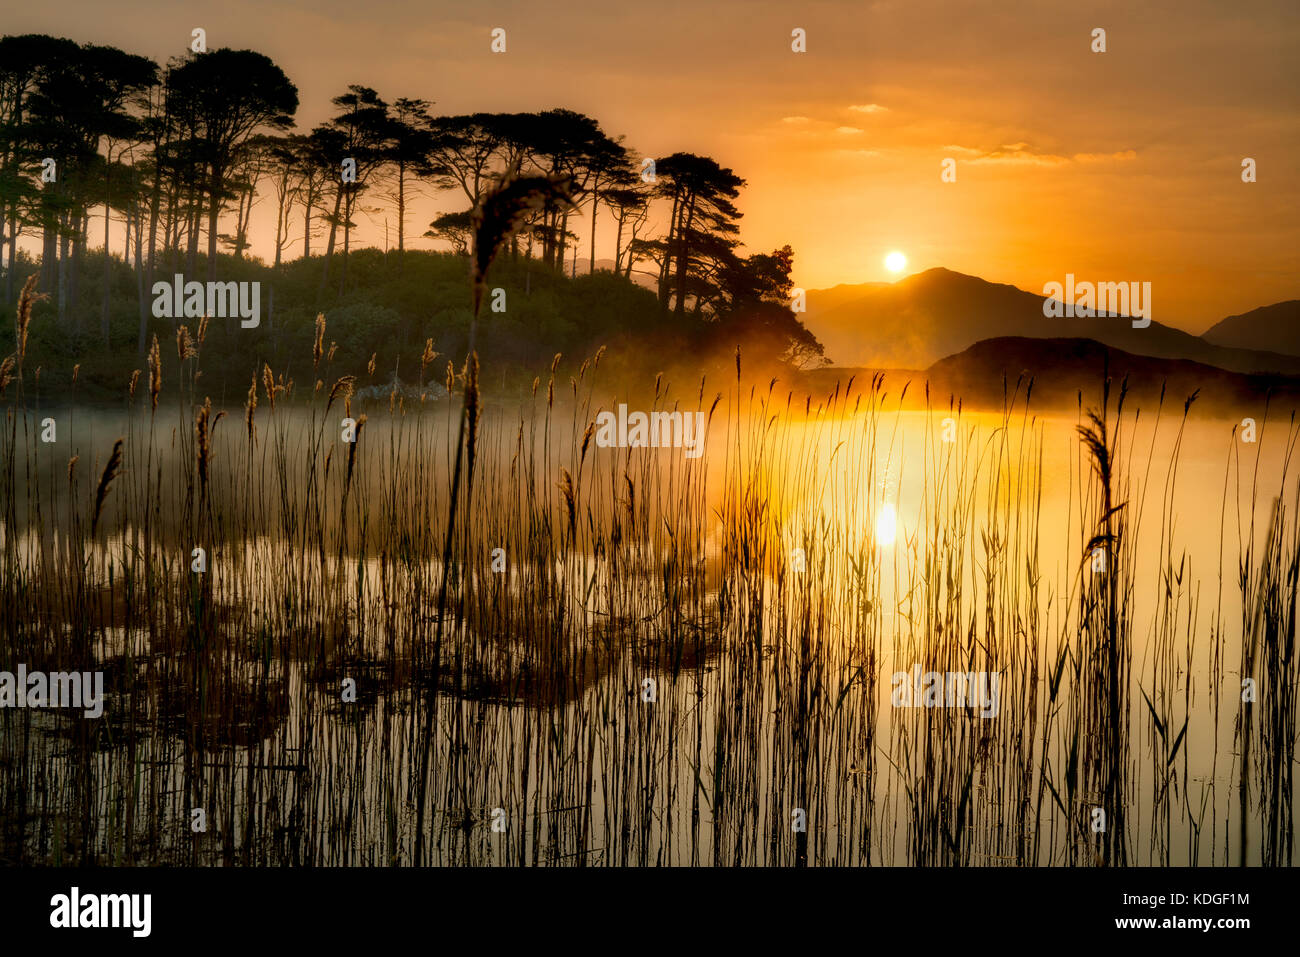 Sunrise on Derryclare Loch/lake with some of the 12 Ben Mountains and edge reeds. County Galway, Connemara, Ireland Stock Photo